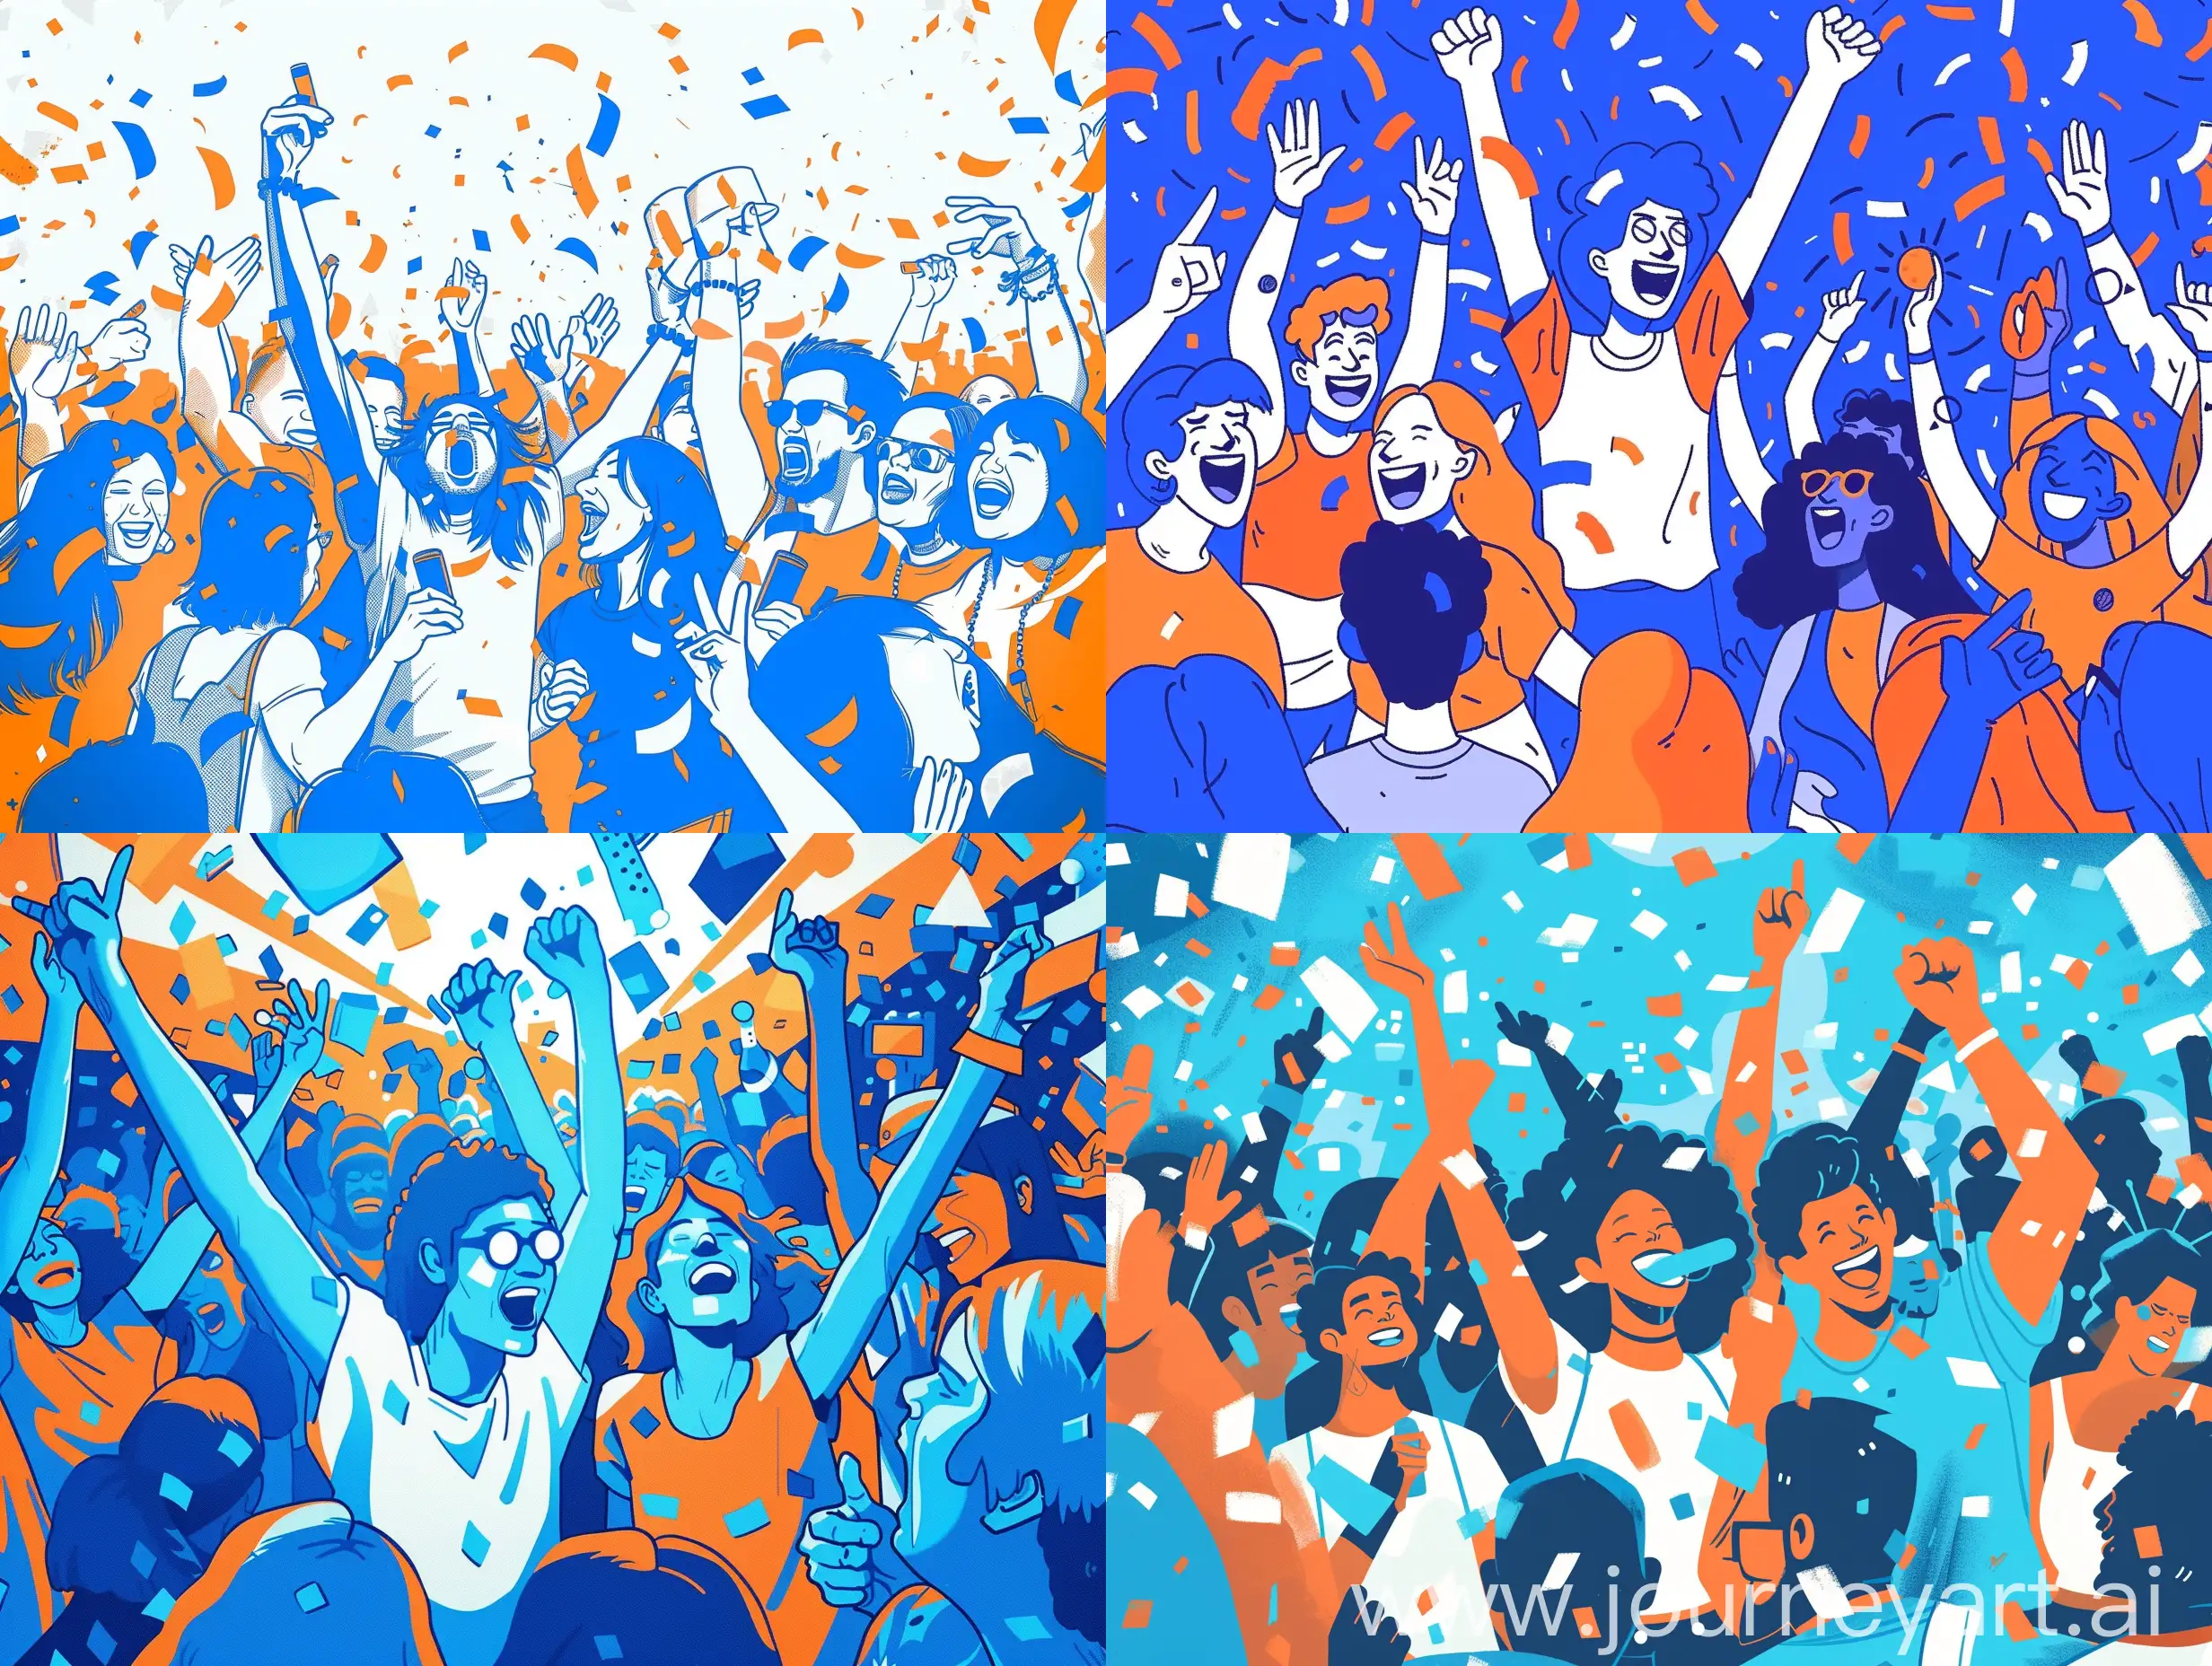 Vibrant-Cartoon-Rave-Party-with-Blue-Orange-and-White-Colors